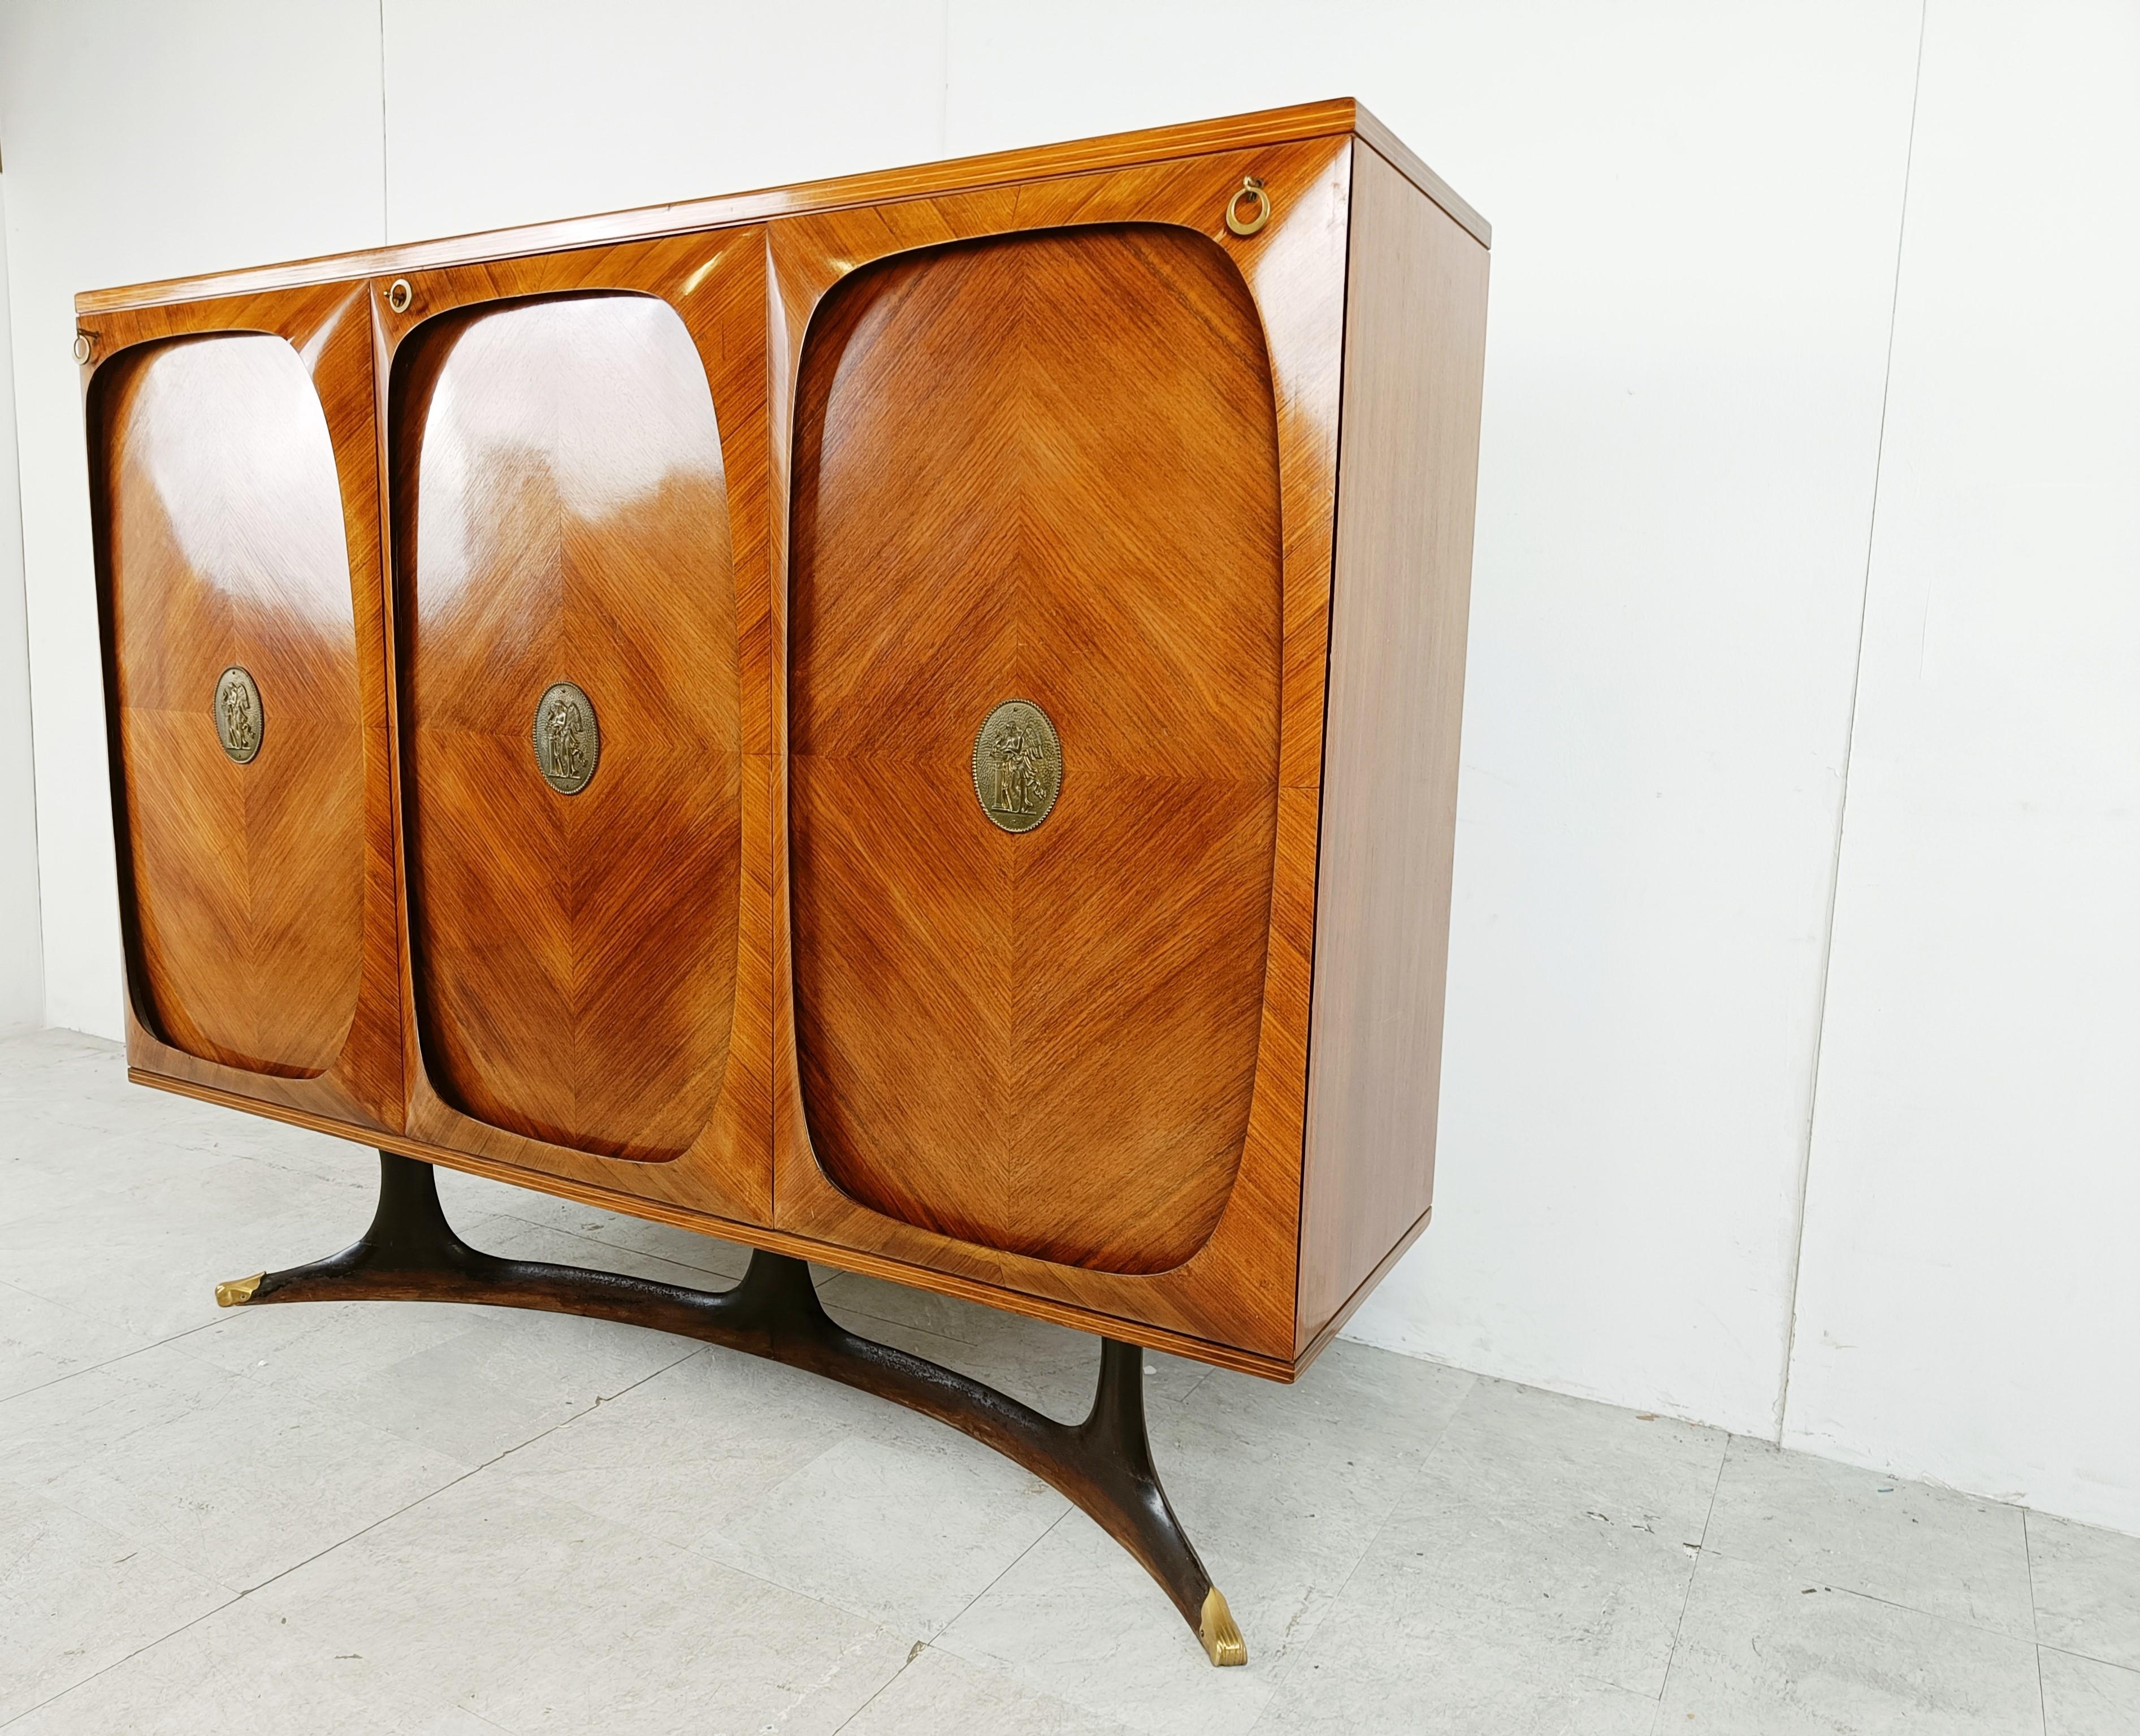 Italian Rosewood Highboard by Vittorio Dassi for Lissone, 1950s For Sale 2